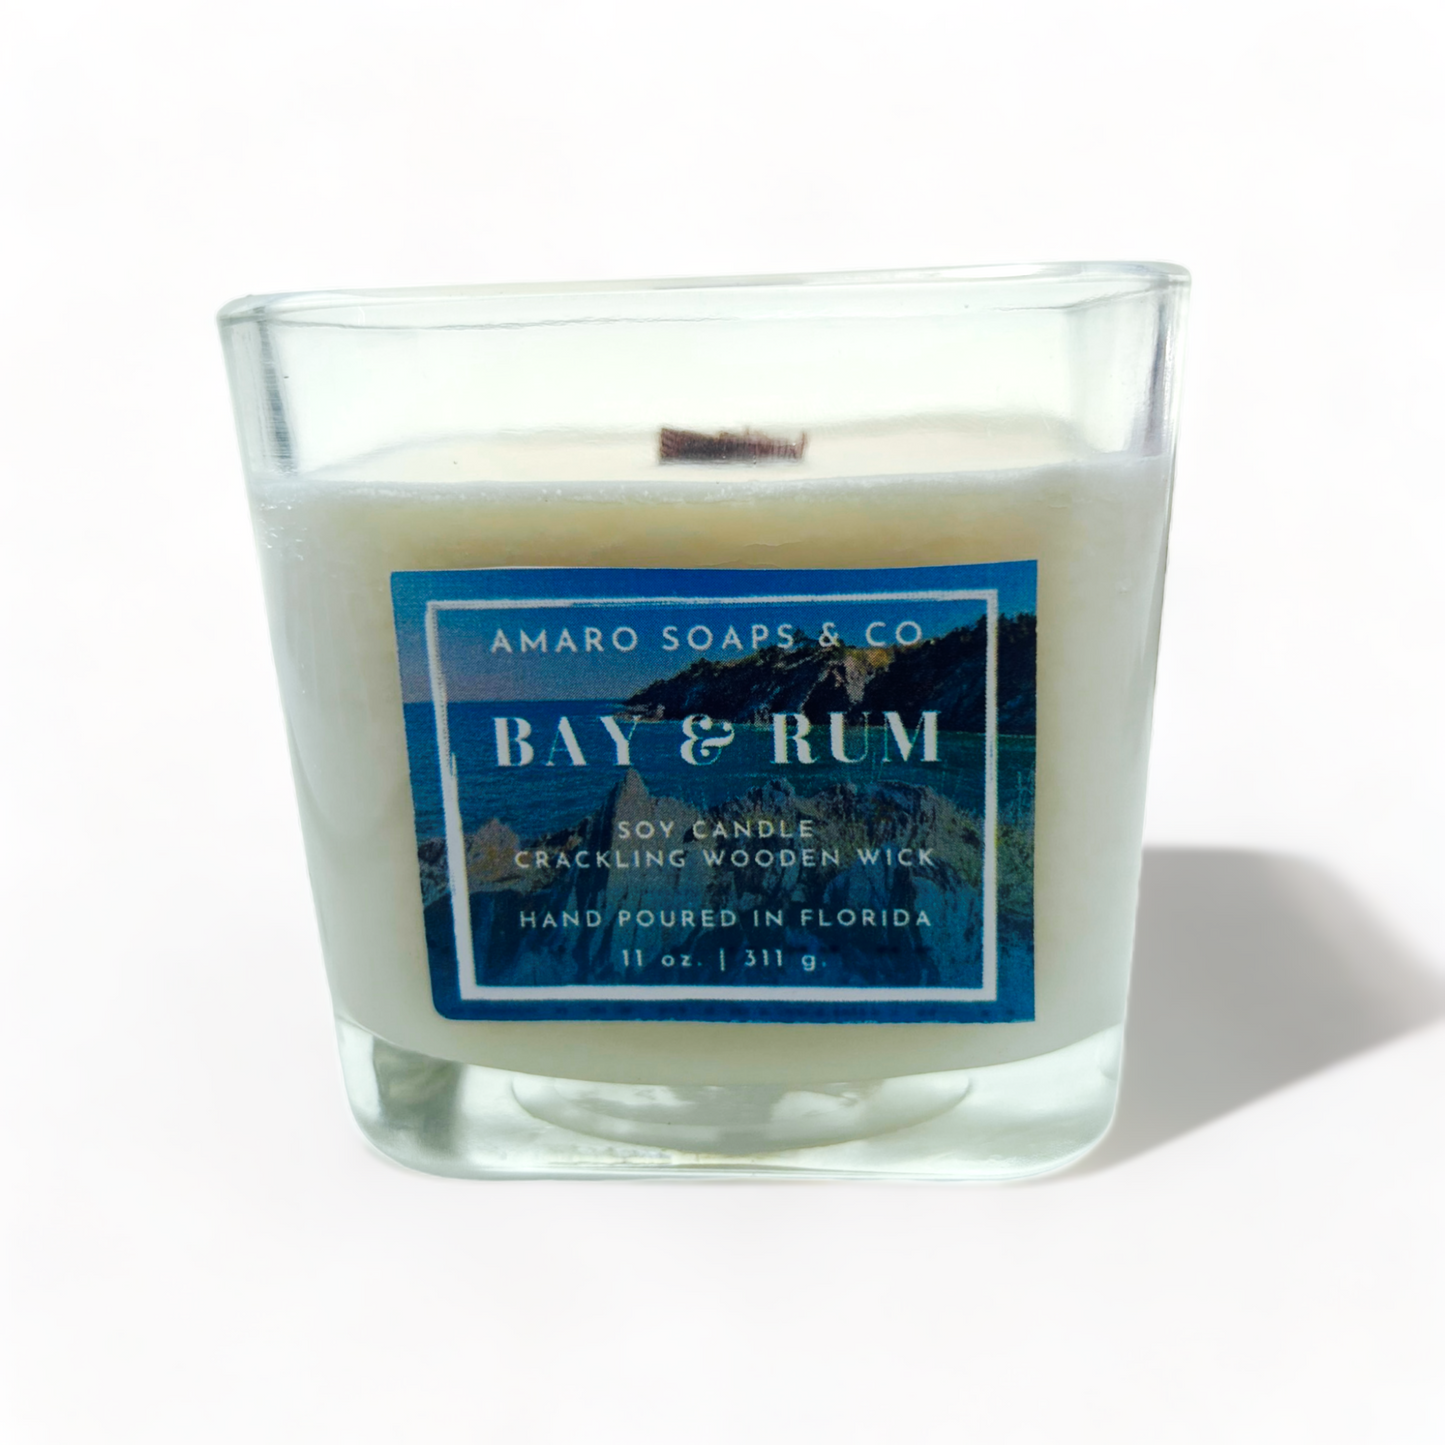 Bay & Rum Wooden Wick Soy Candle